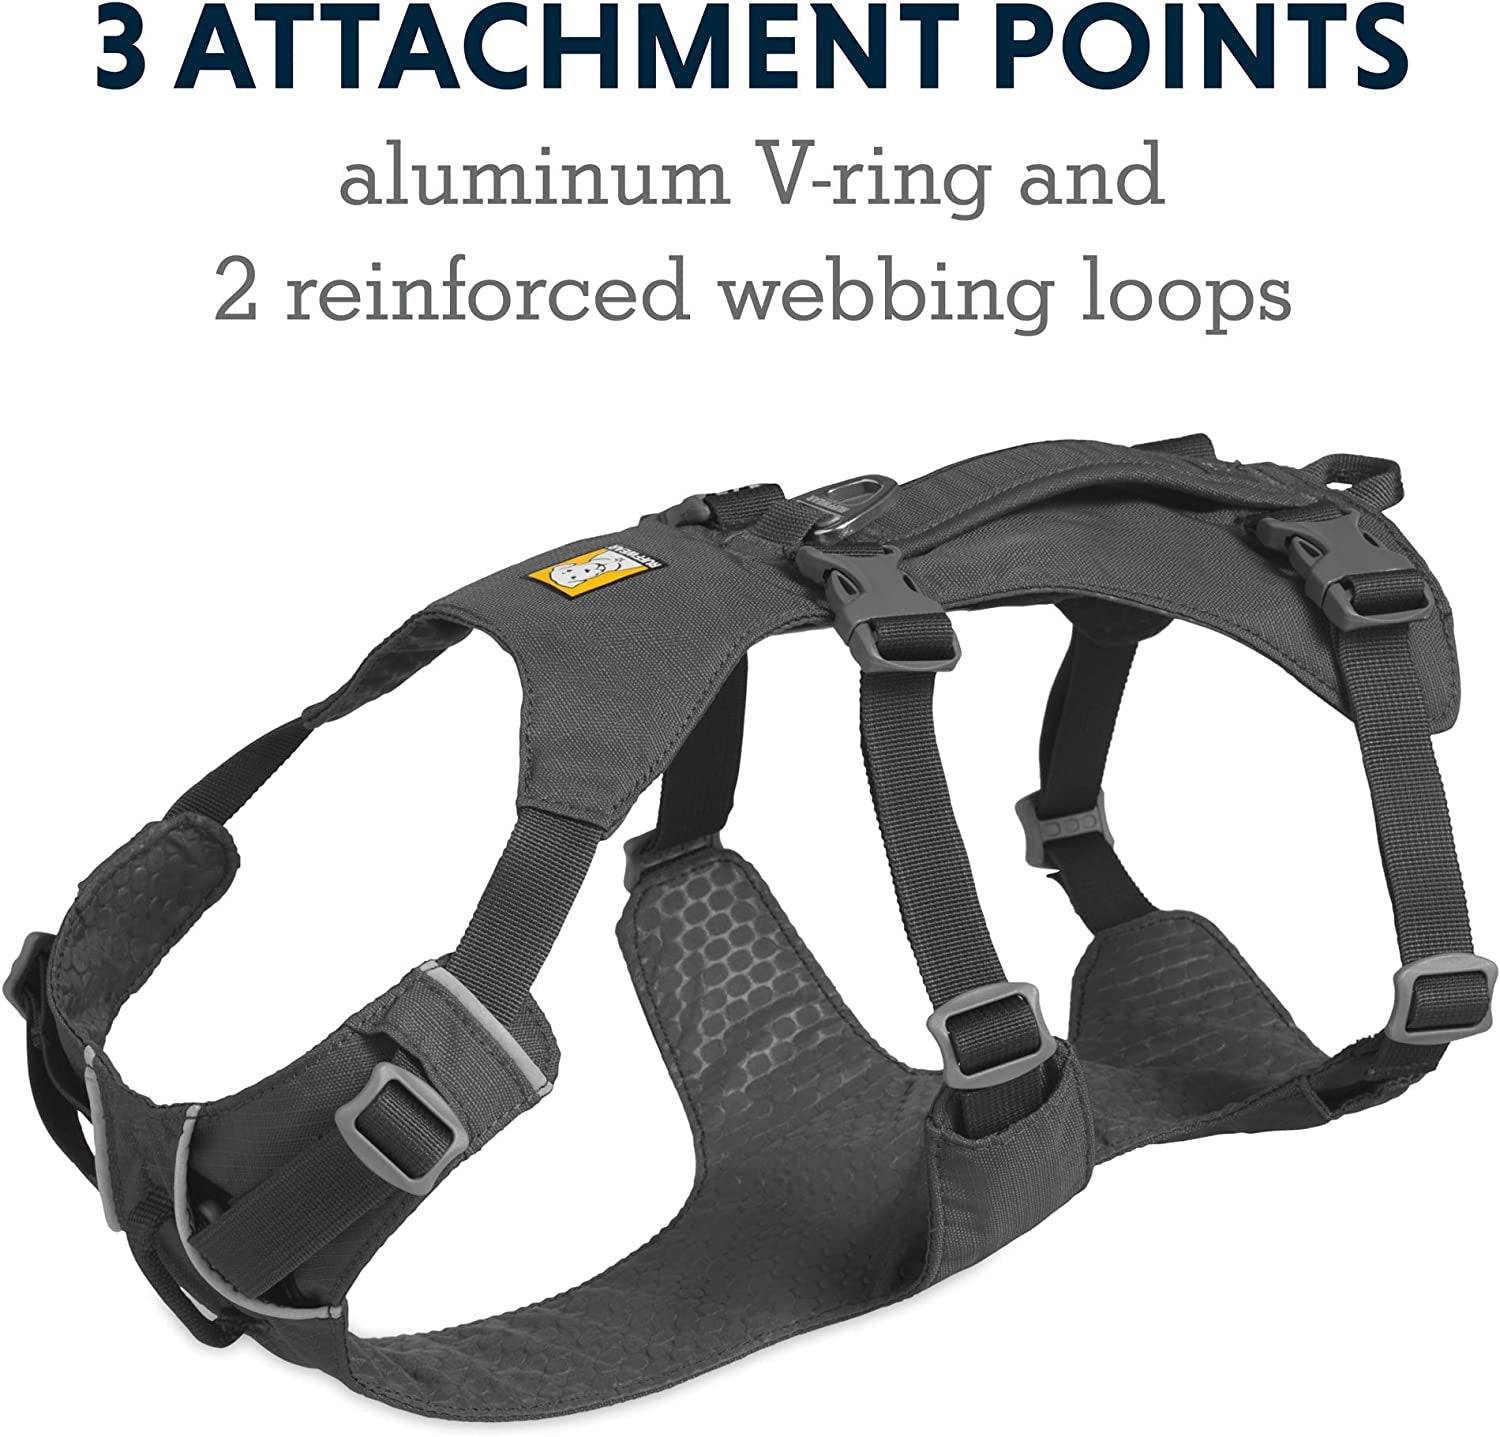 , Flagline Dog Harness, Lightweight Lift-And-Assist Harness with Padded Handle, Granite Gray, Large/X-Large